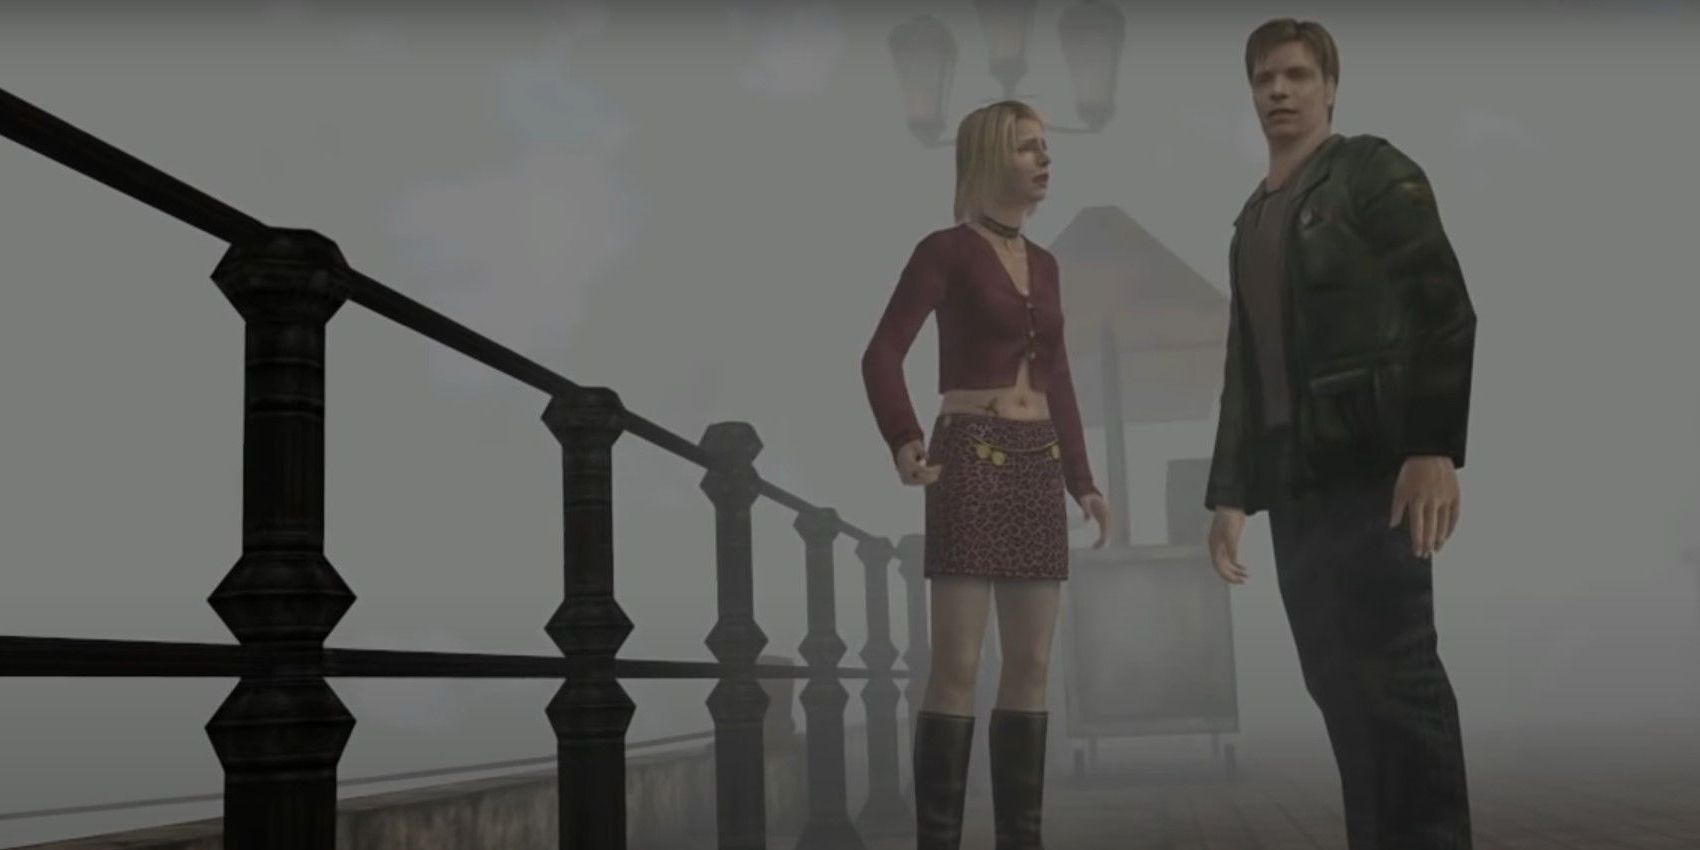 Maria and James Sunderland in a foggy Silent Hill 2 location